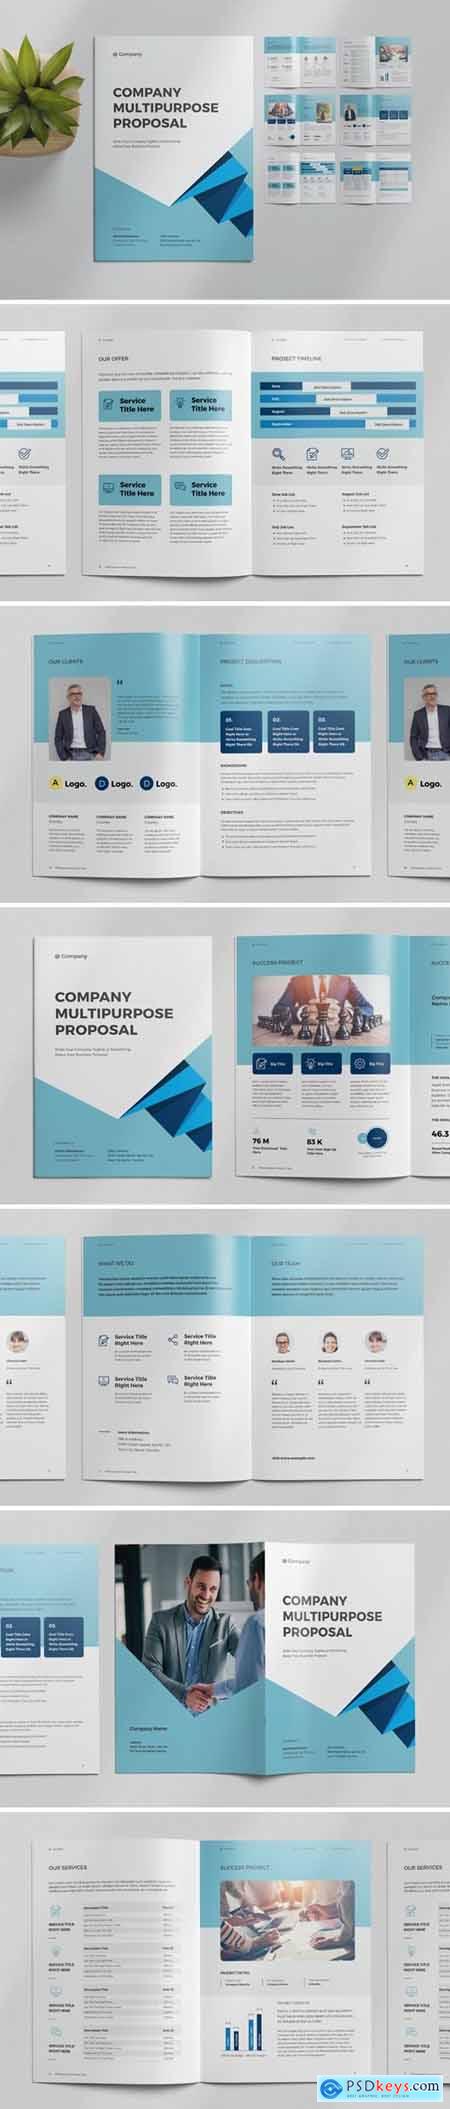 Proposal Layout with Blue Geometric Elements » Free Download Photoshop ...